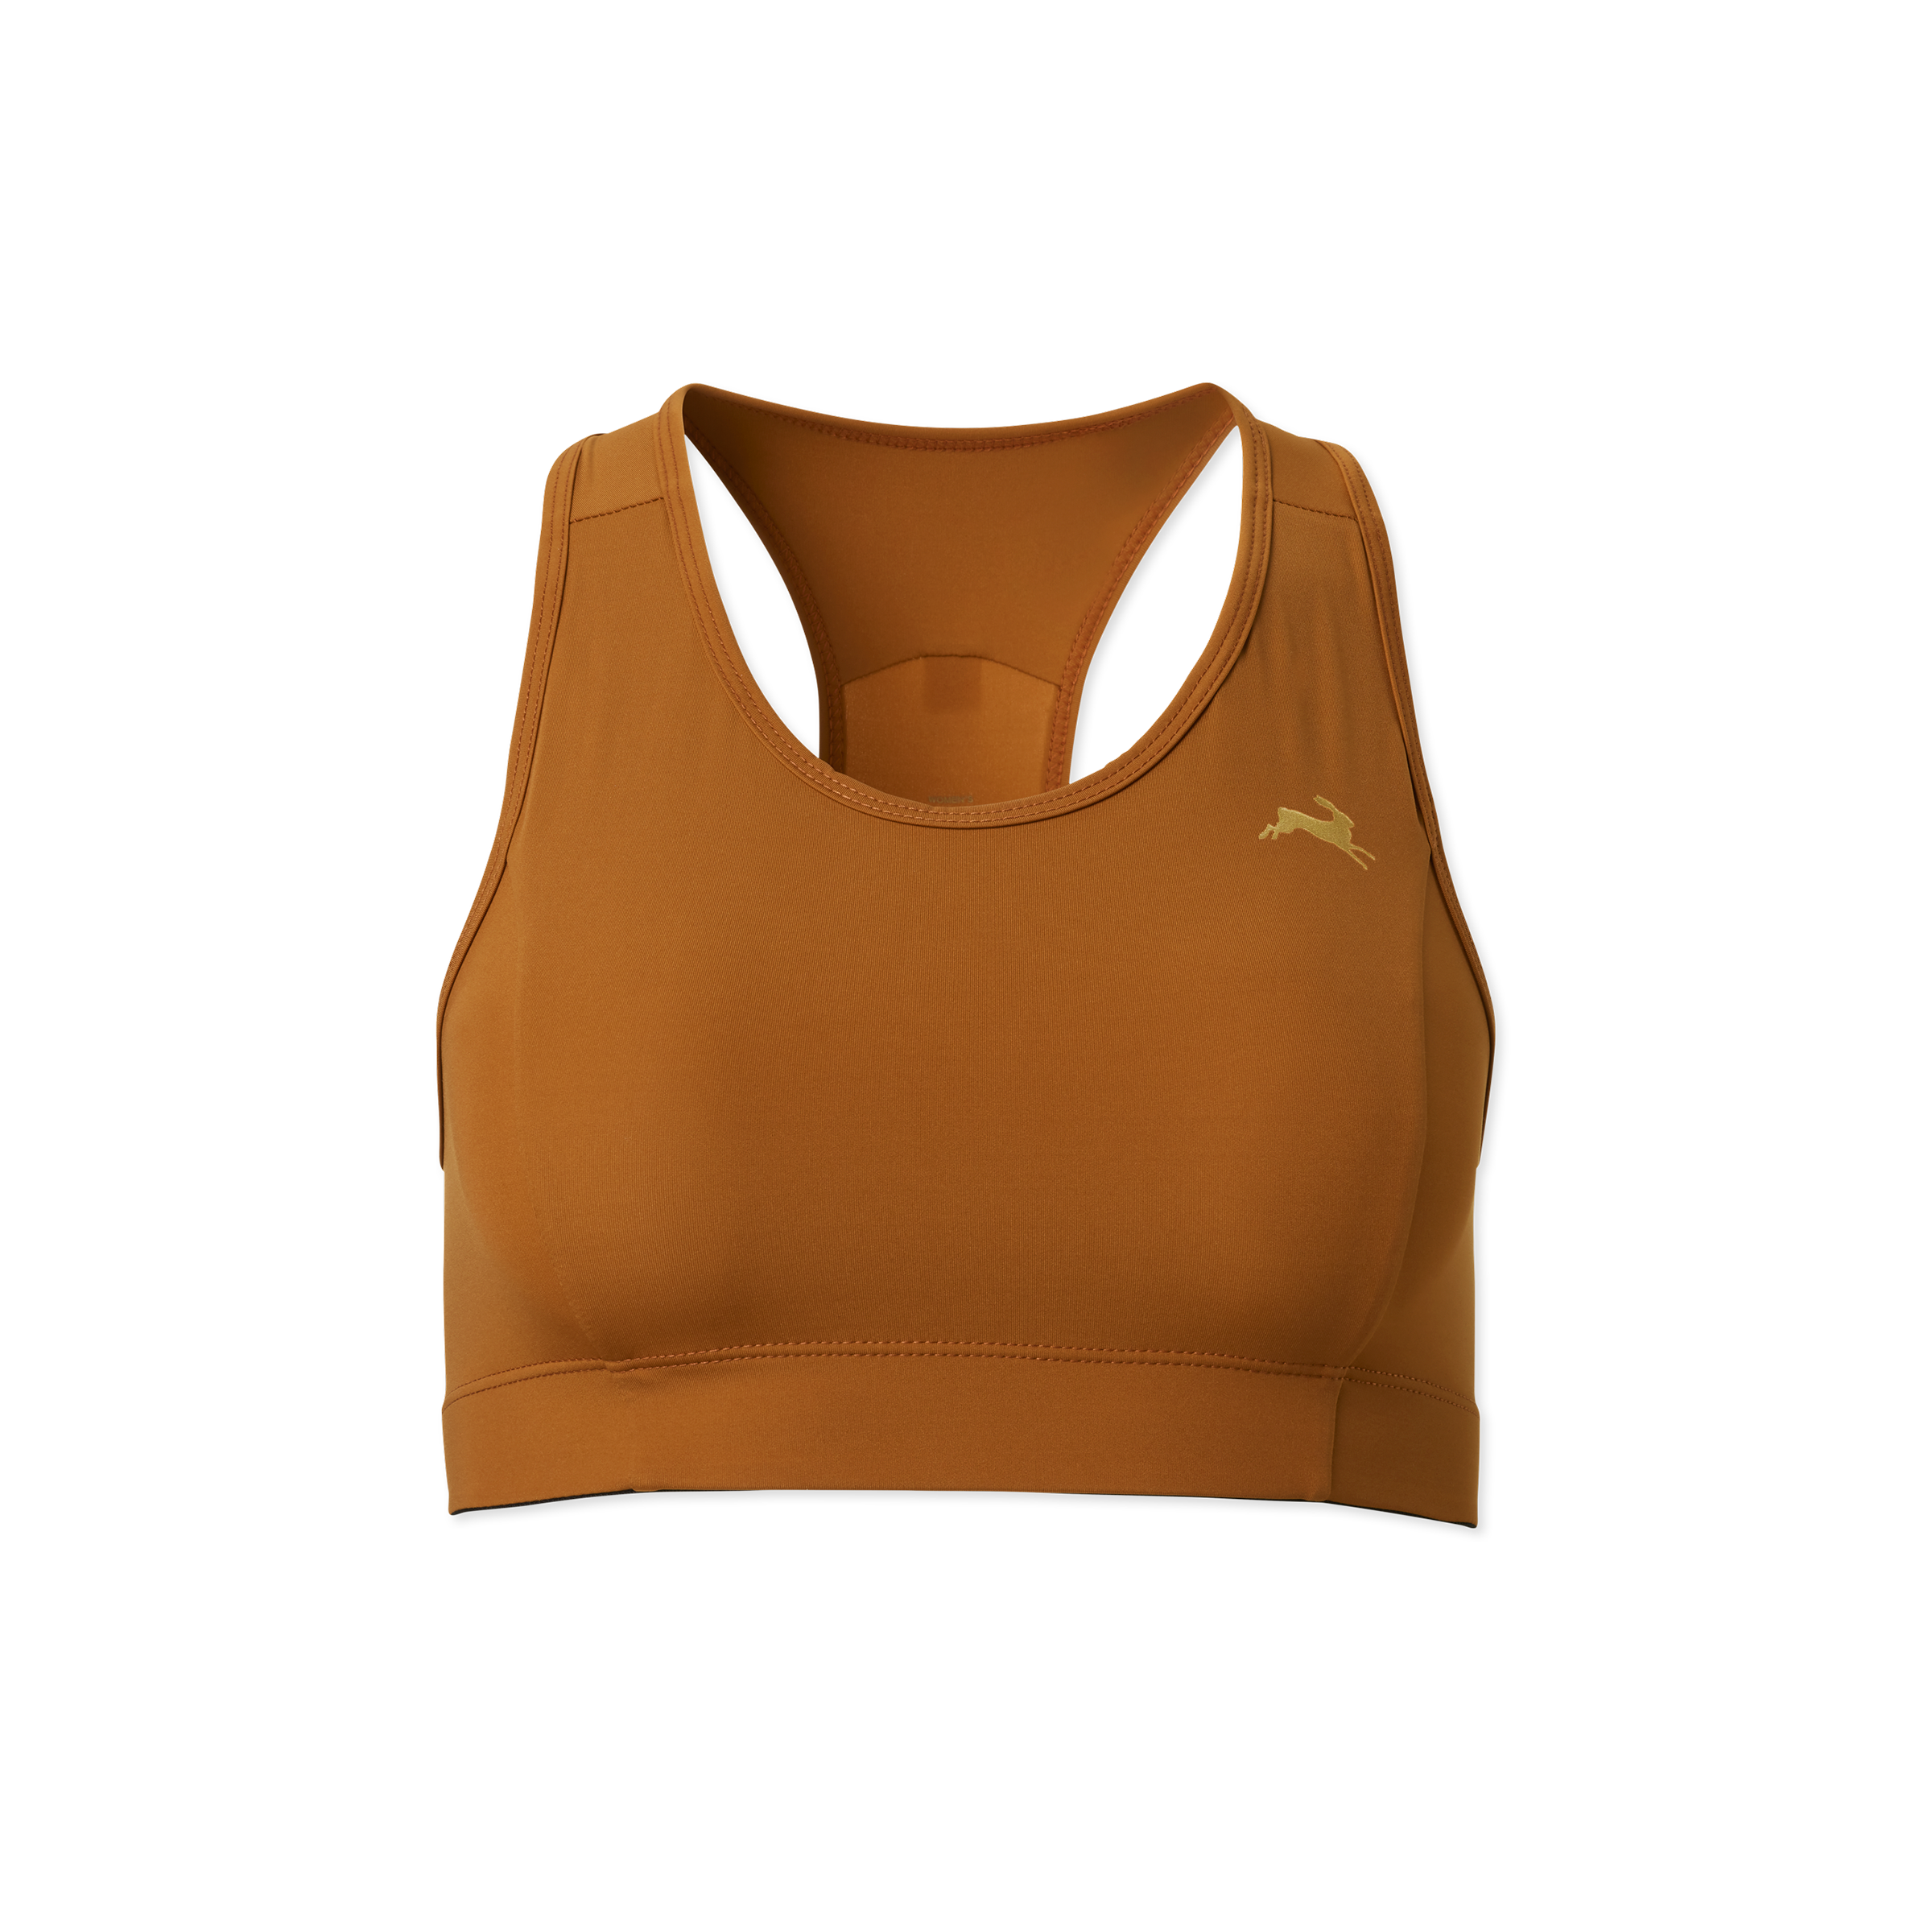 https://cdn.shopify.com/s/files/1/1594/4353/files/Fall23-Womens-Allston-Pocket-Bra-Caramel-Cafe-On-Model.png?v=1695225705?auto=format,compress&crop=faces&dpr=2&fit=crop&h=260&w=260